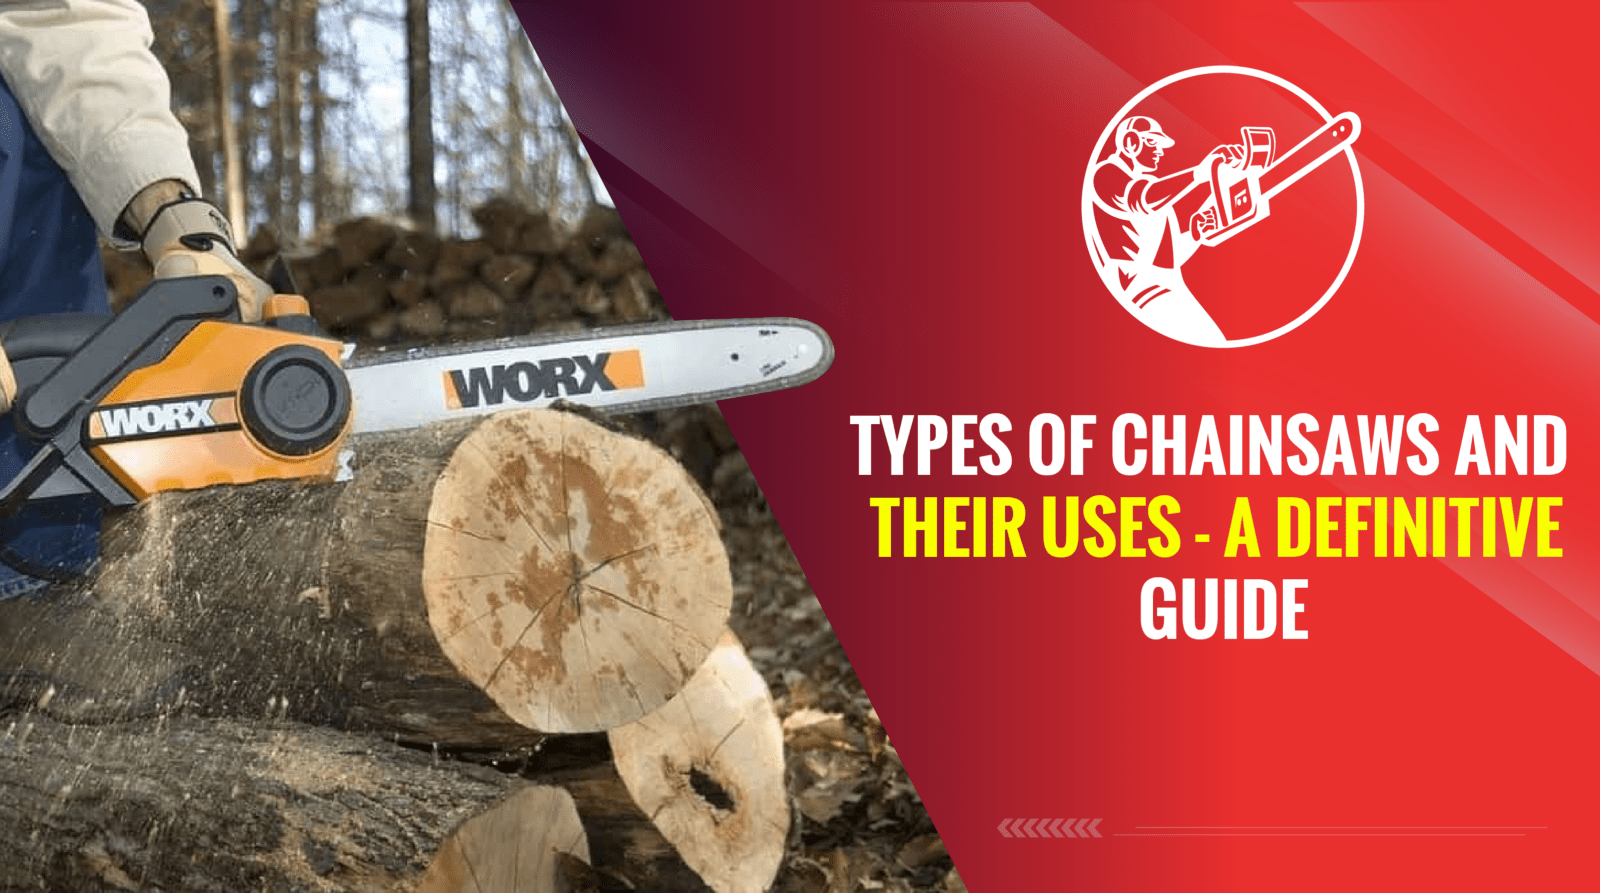 Types of Chainsaws and Their Uses - A Definitive Guide